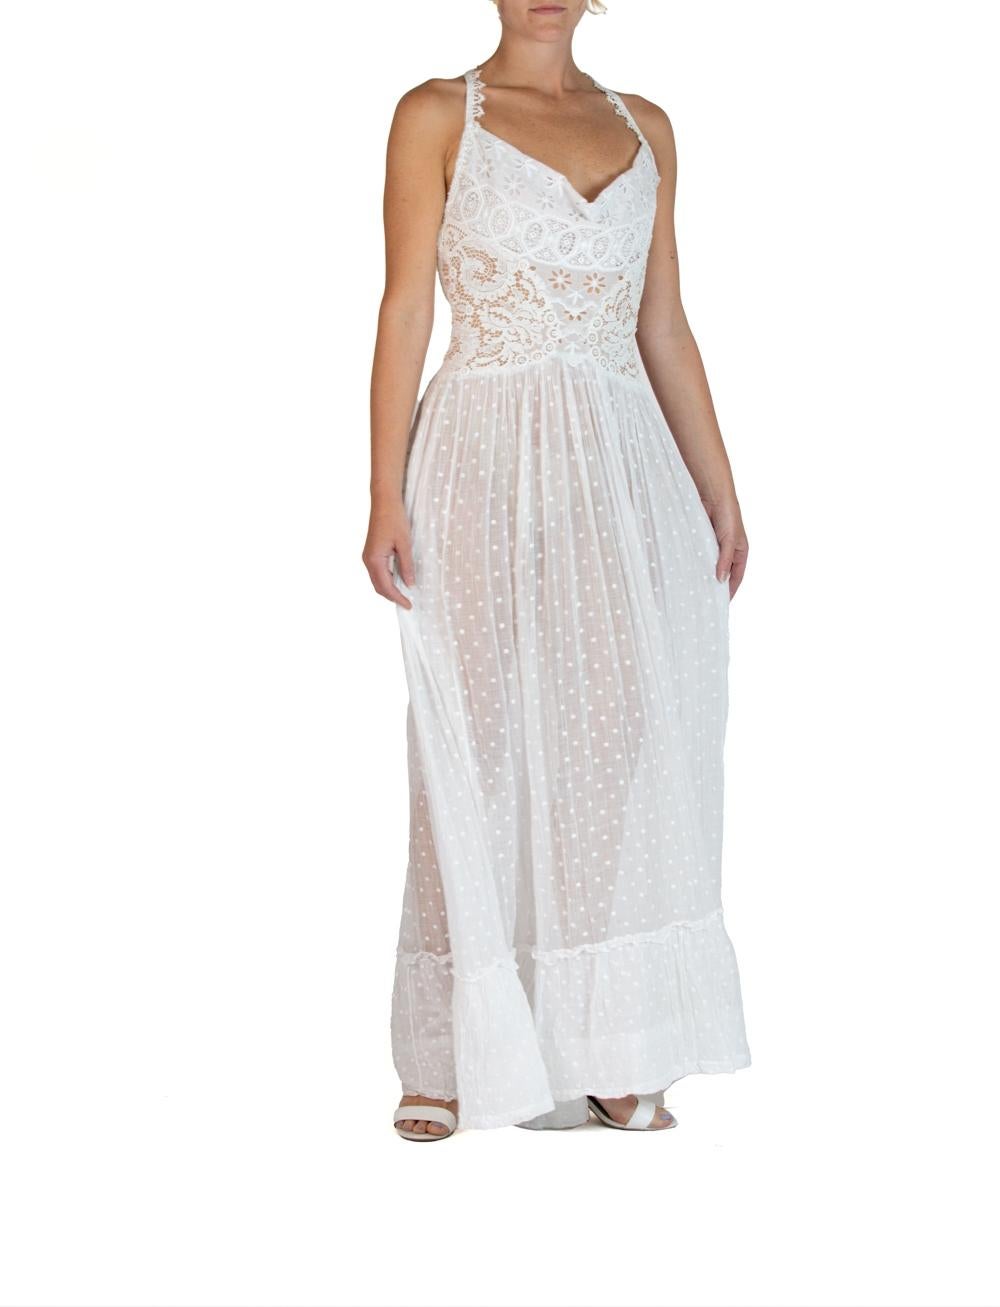 MORPHEW ATELIER White Organic Cotton With Victorian Lace & Dotted Voile Gown For Sale 4